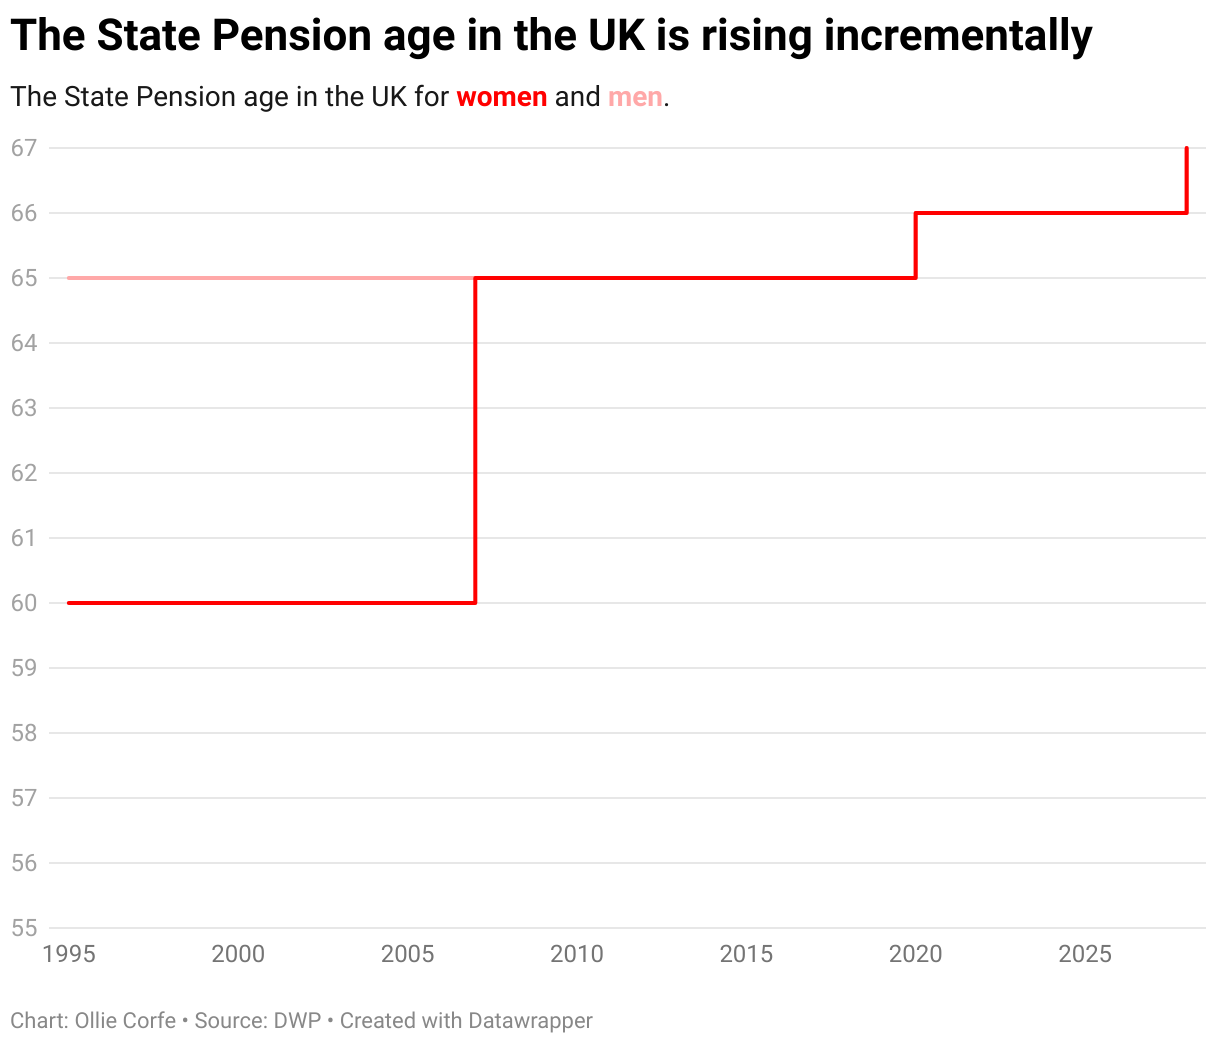 Line chart describing the increases in the state pension age in the UK.